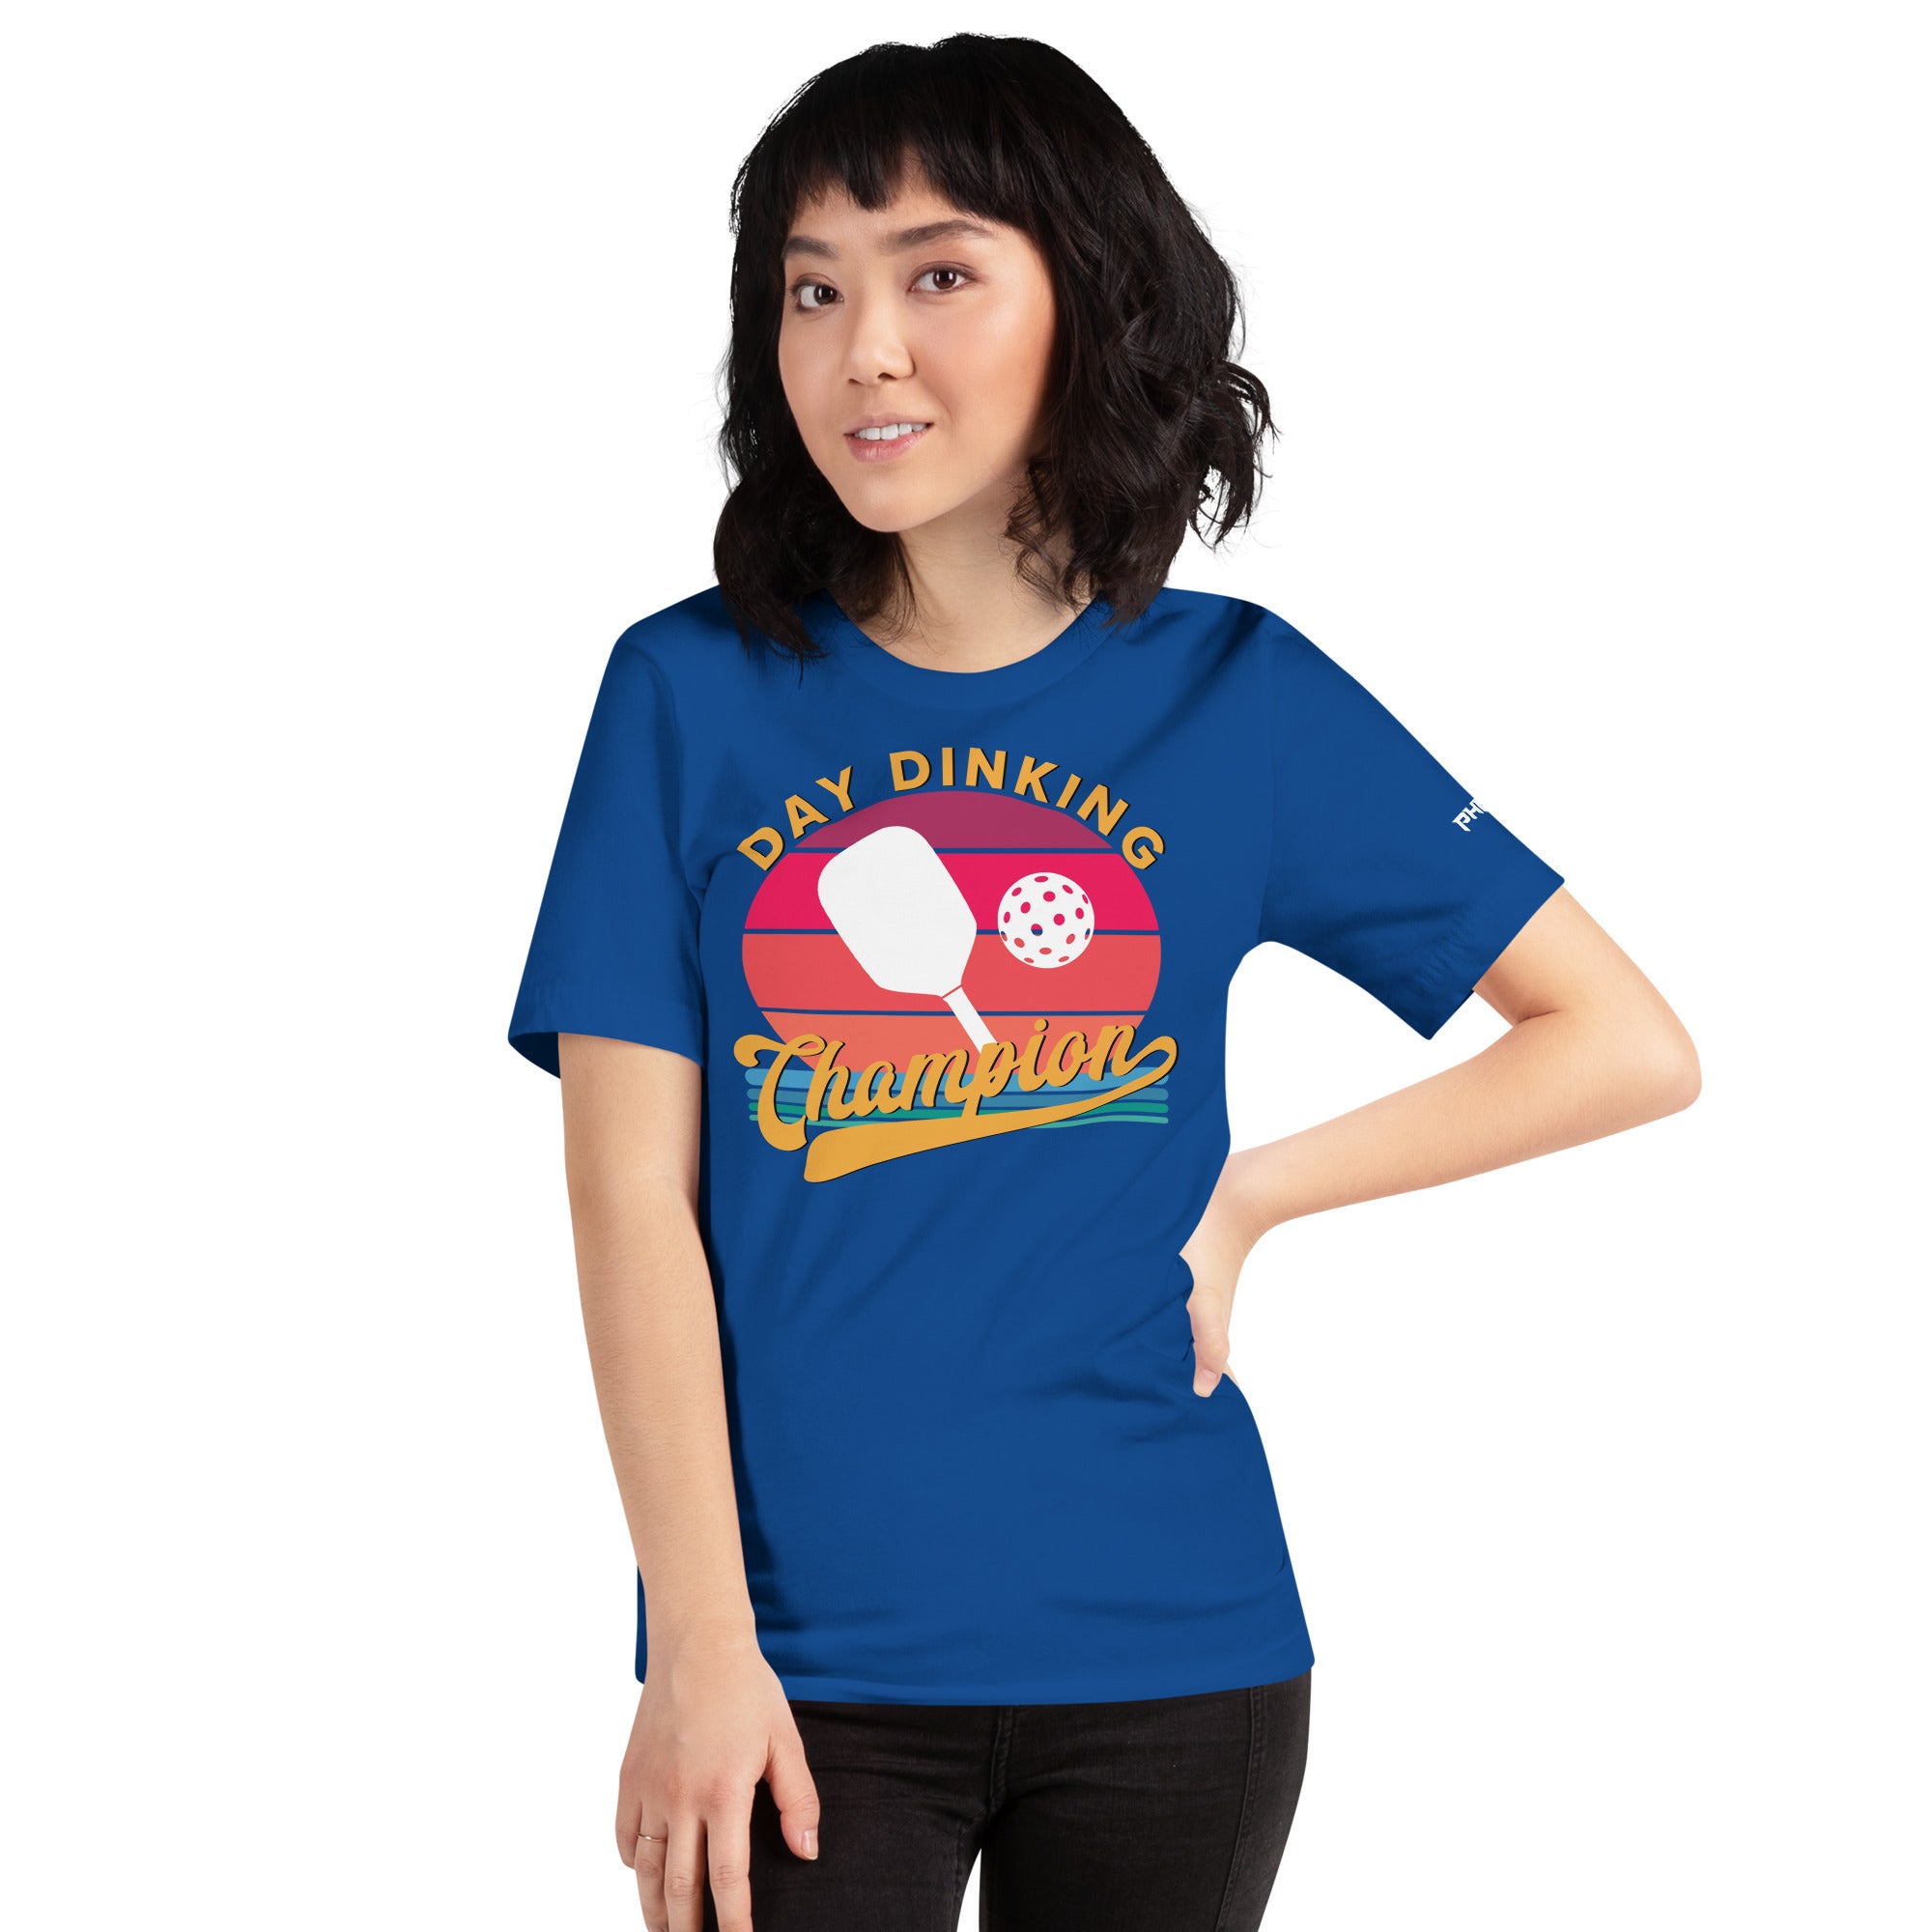 smiling asian petite woman wearing royal blue day dinking champion retro inspired pickleball shirt apparel front view